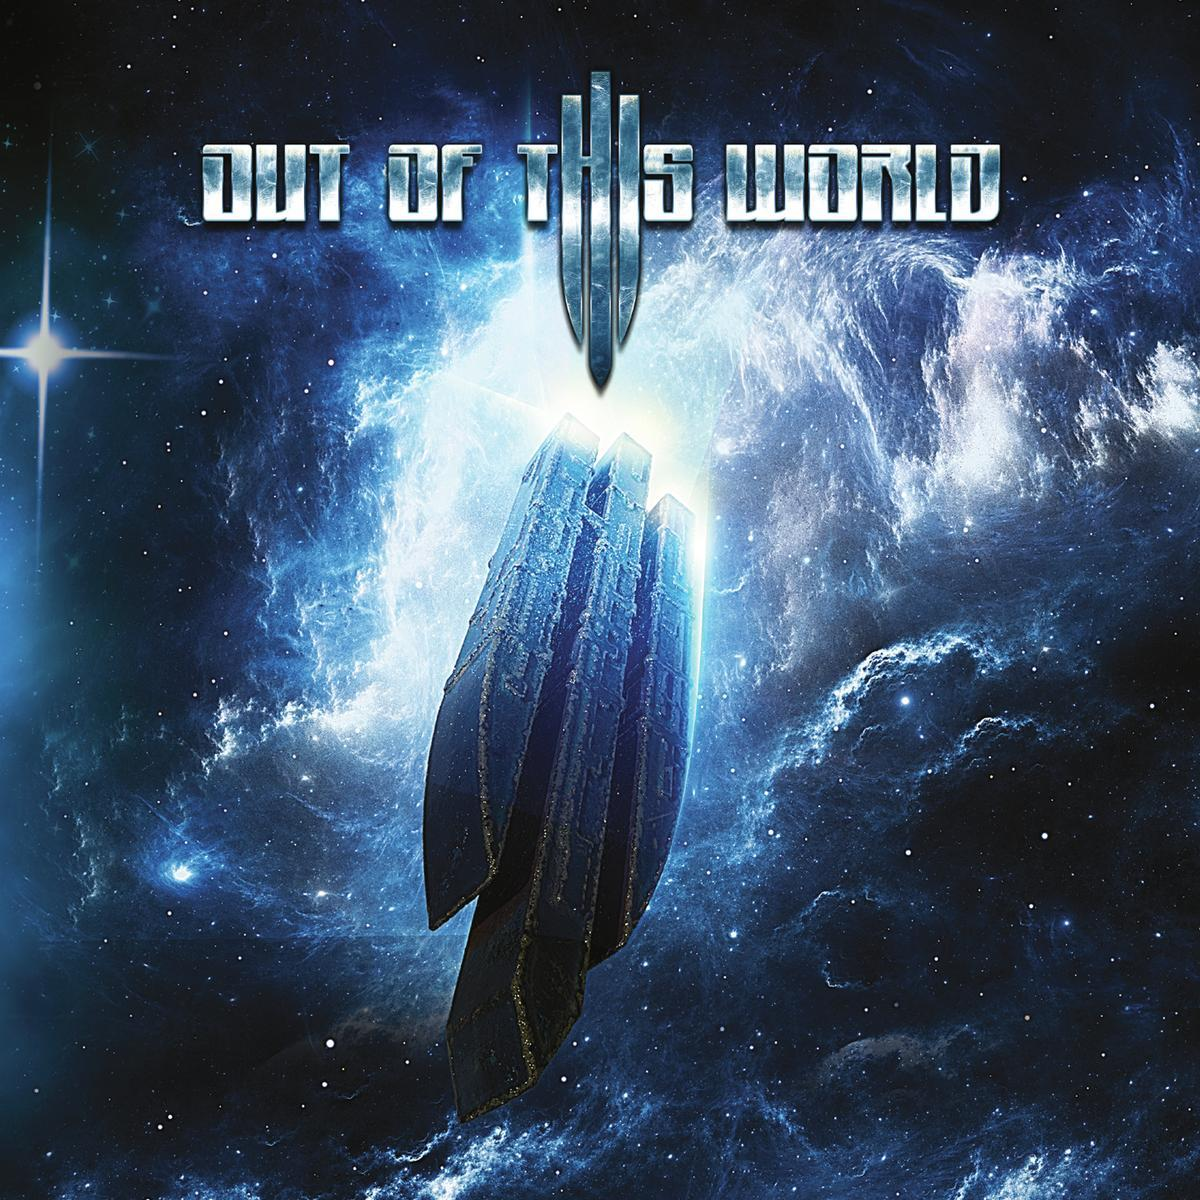 OUT Of - WORLD THIS OF (Vinyl) This Out World -